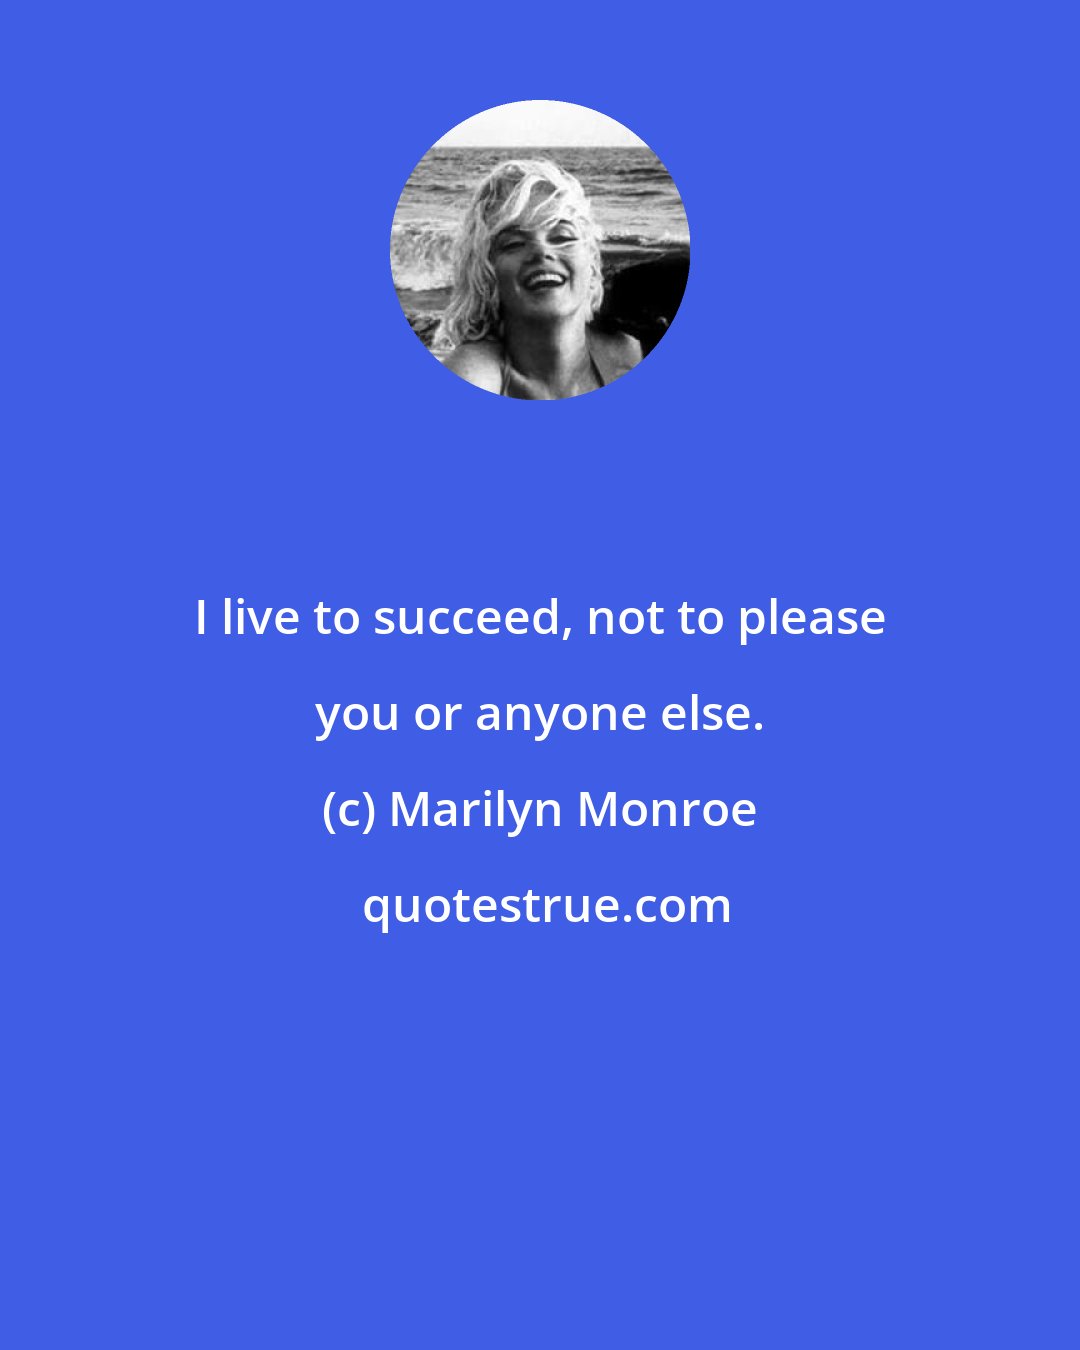 Marilyn Monroe: I live to succeed, not to please you or anyone else.